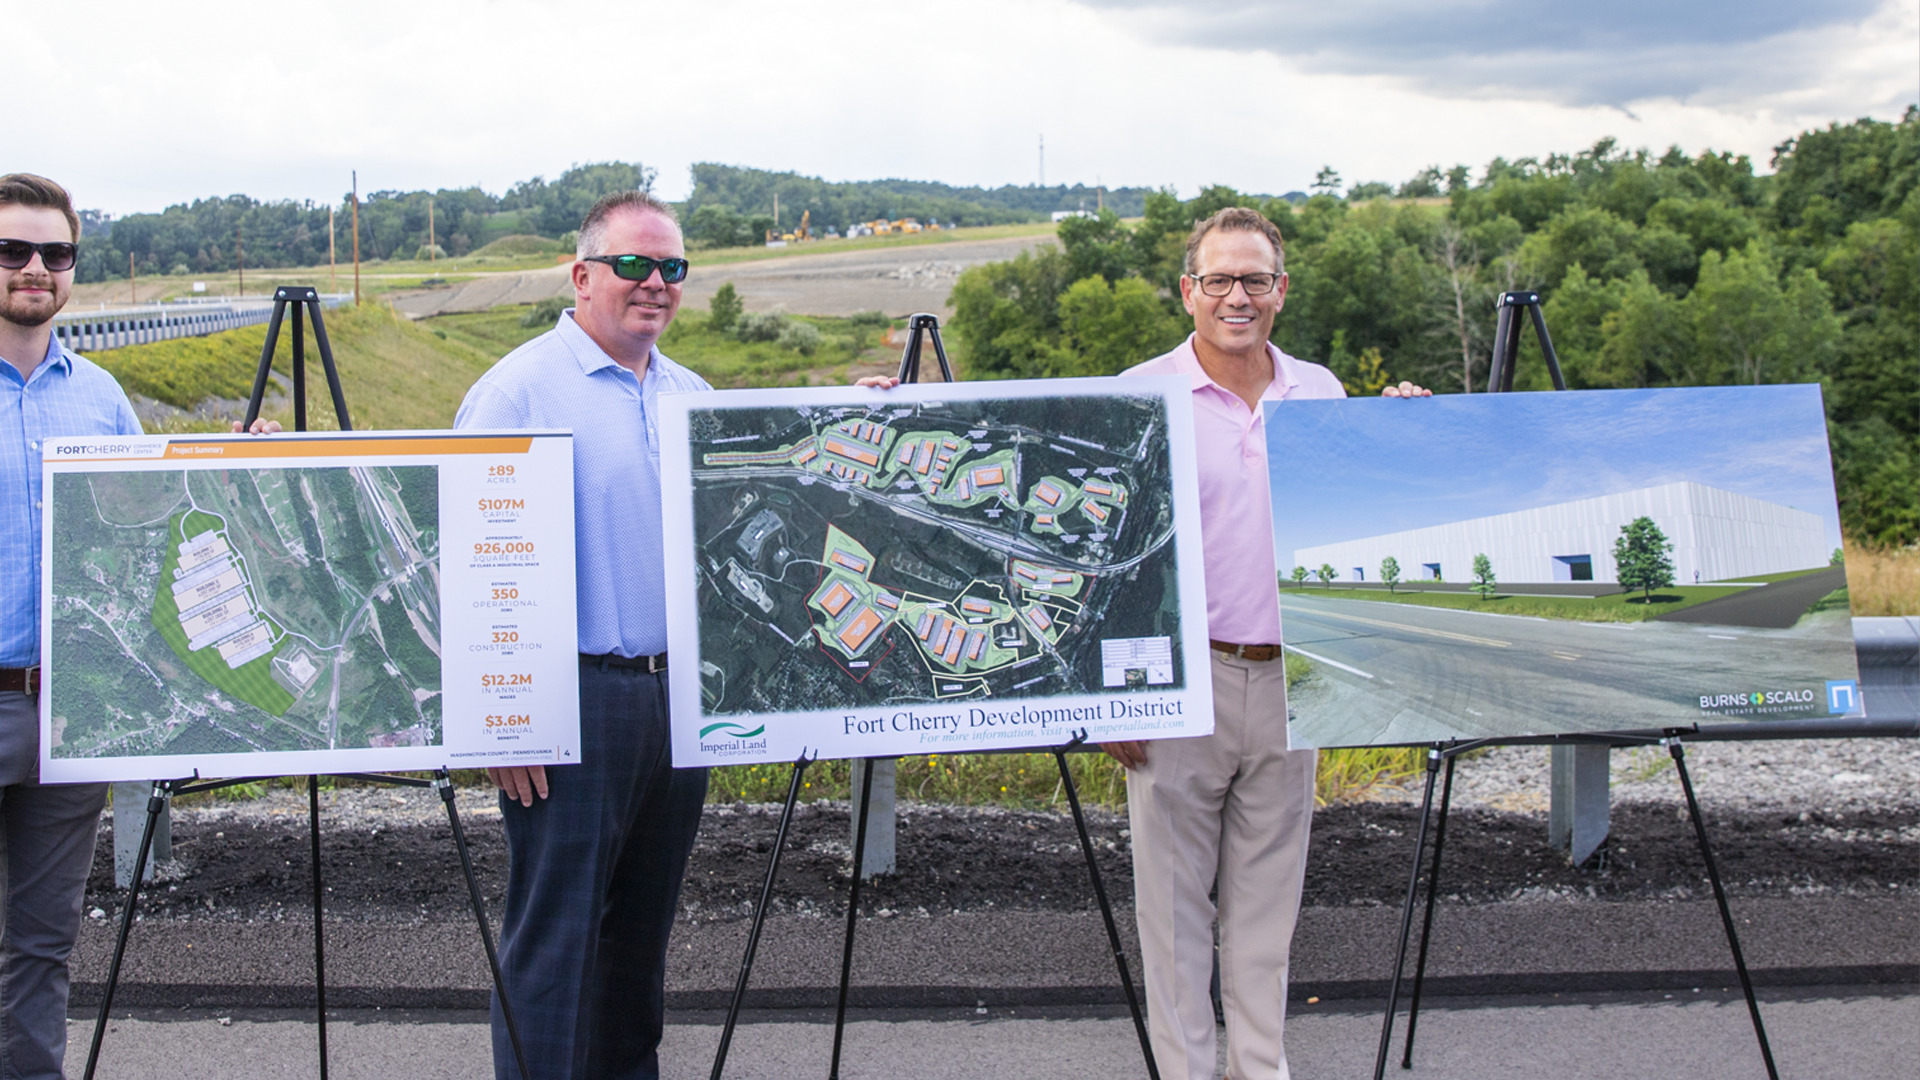 three signs showing plans for new fort cherry development district